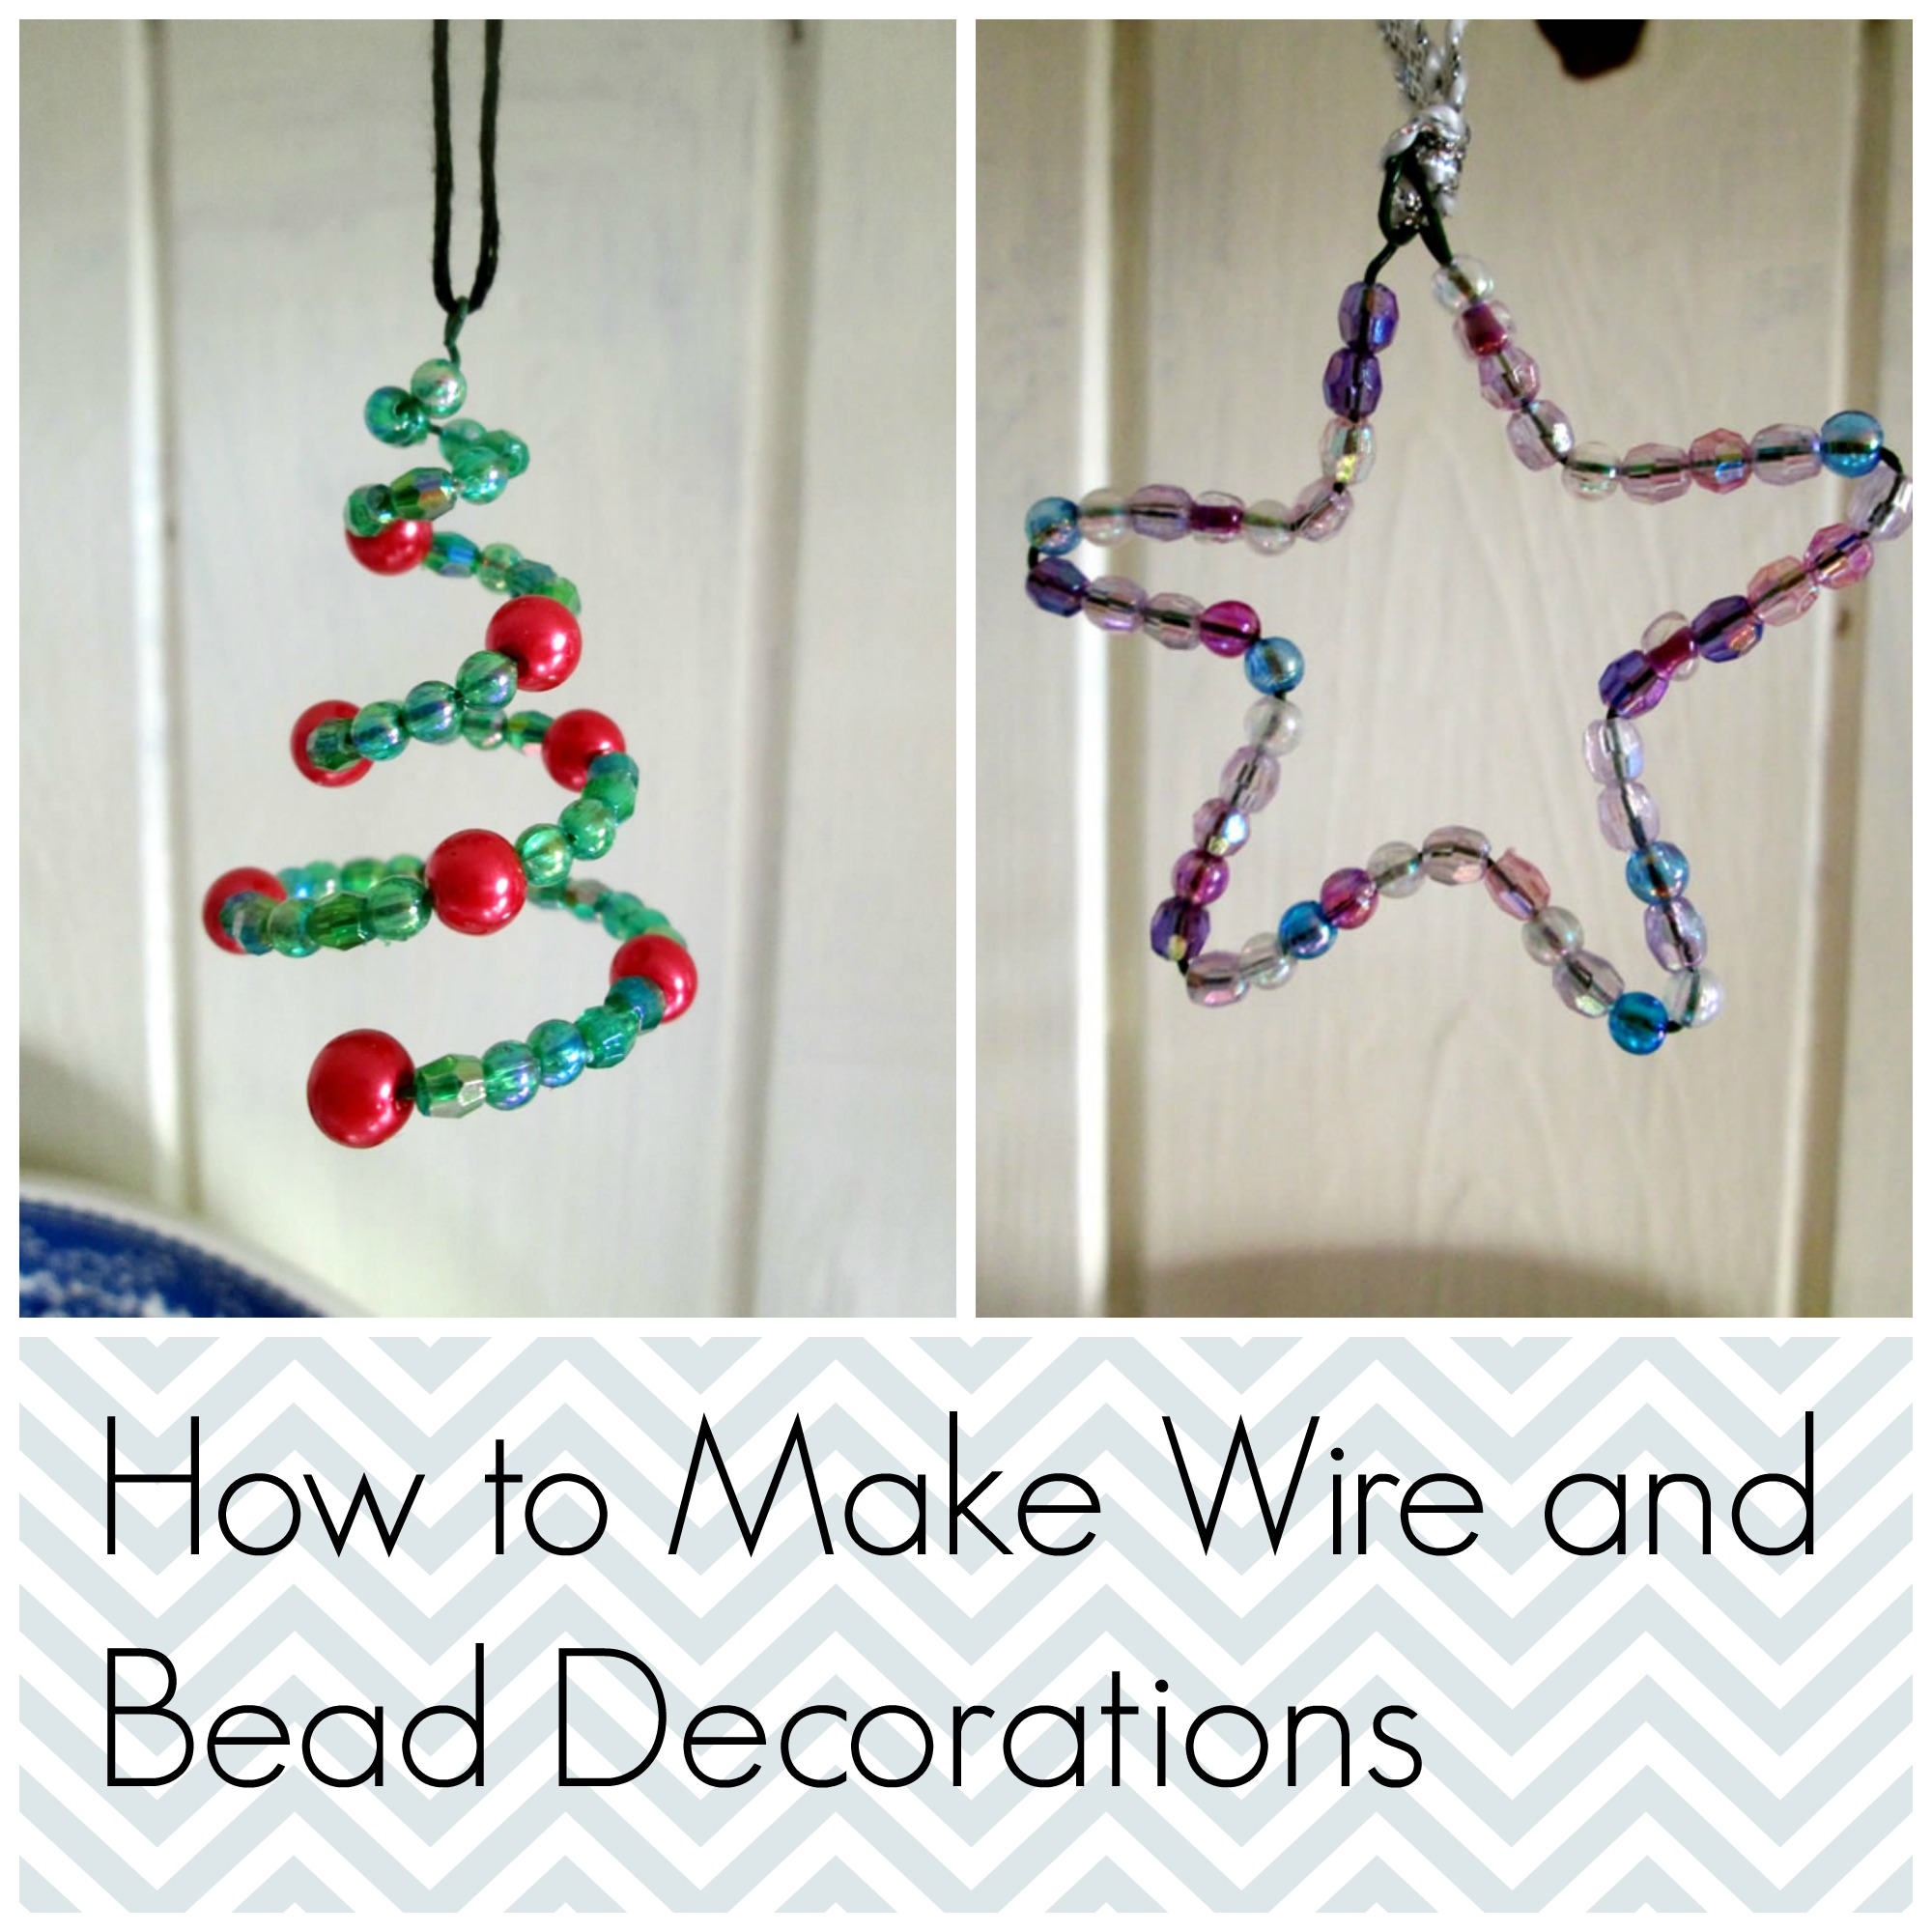 How to make a beaded Christmas Tree - Live Jewelry Tutorial - PART